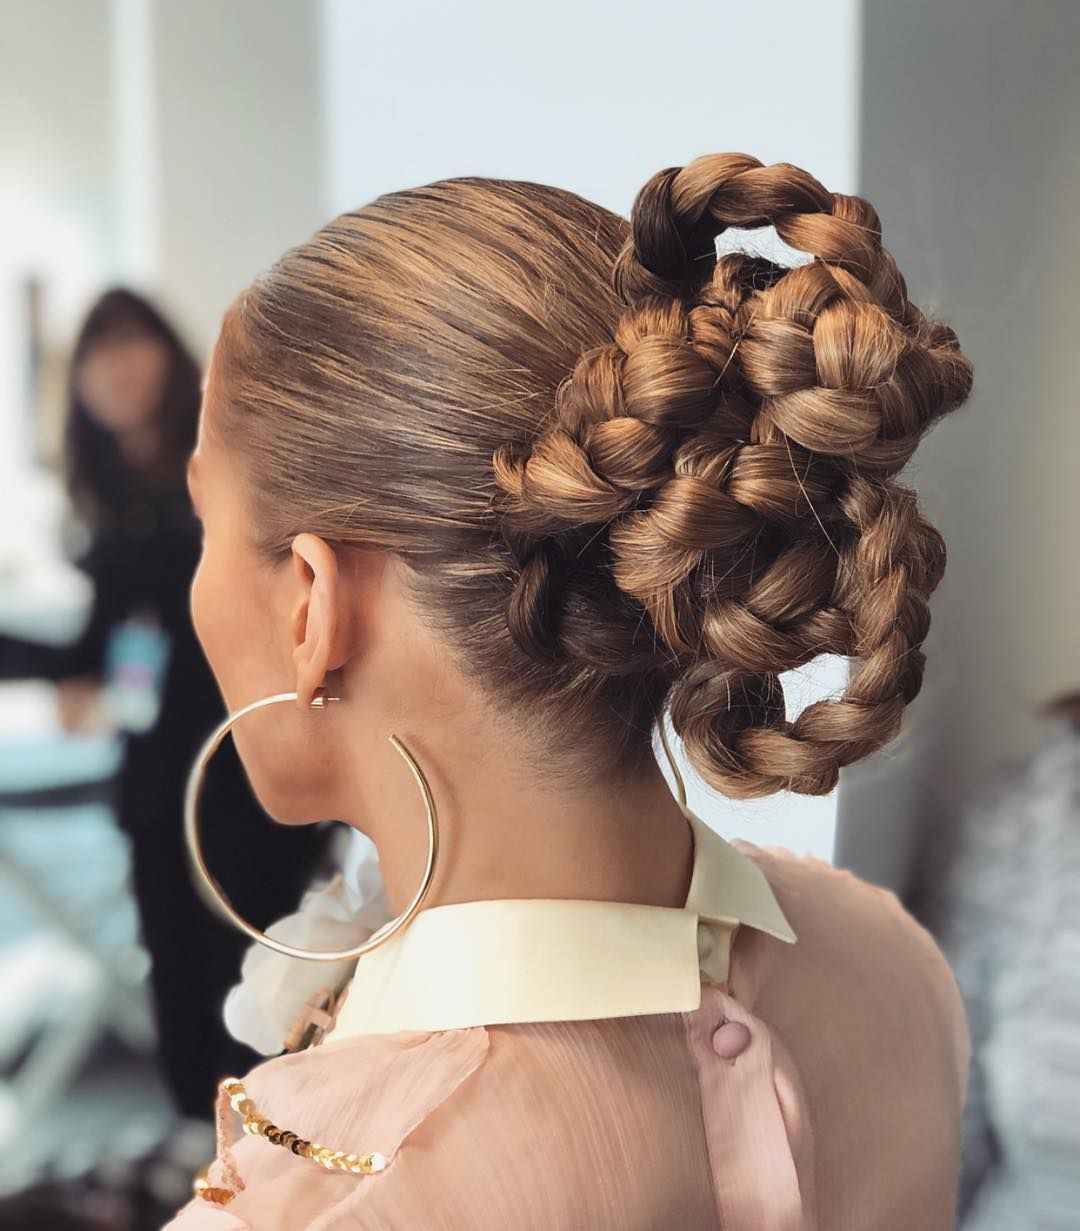 20 Braided Updo Hairstyles - Pictures of Pretty Updos with Braids